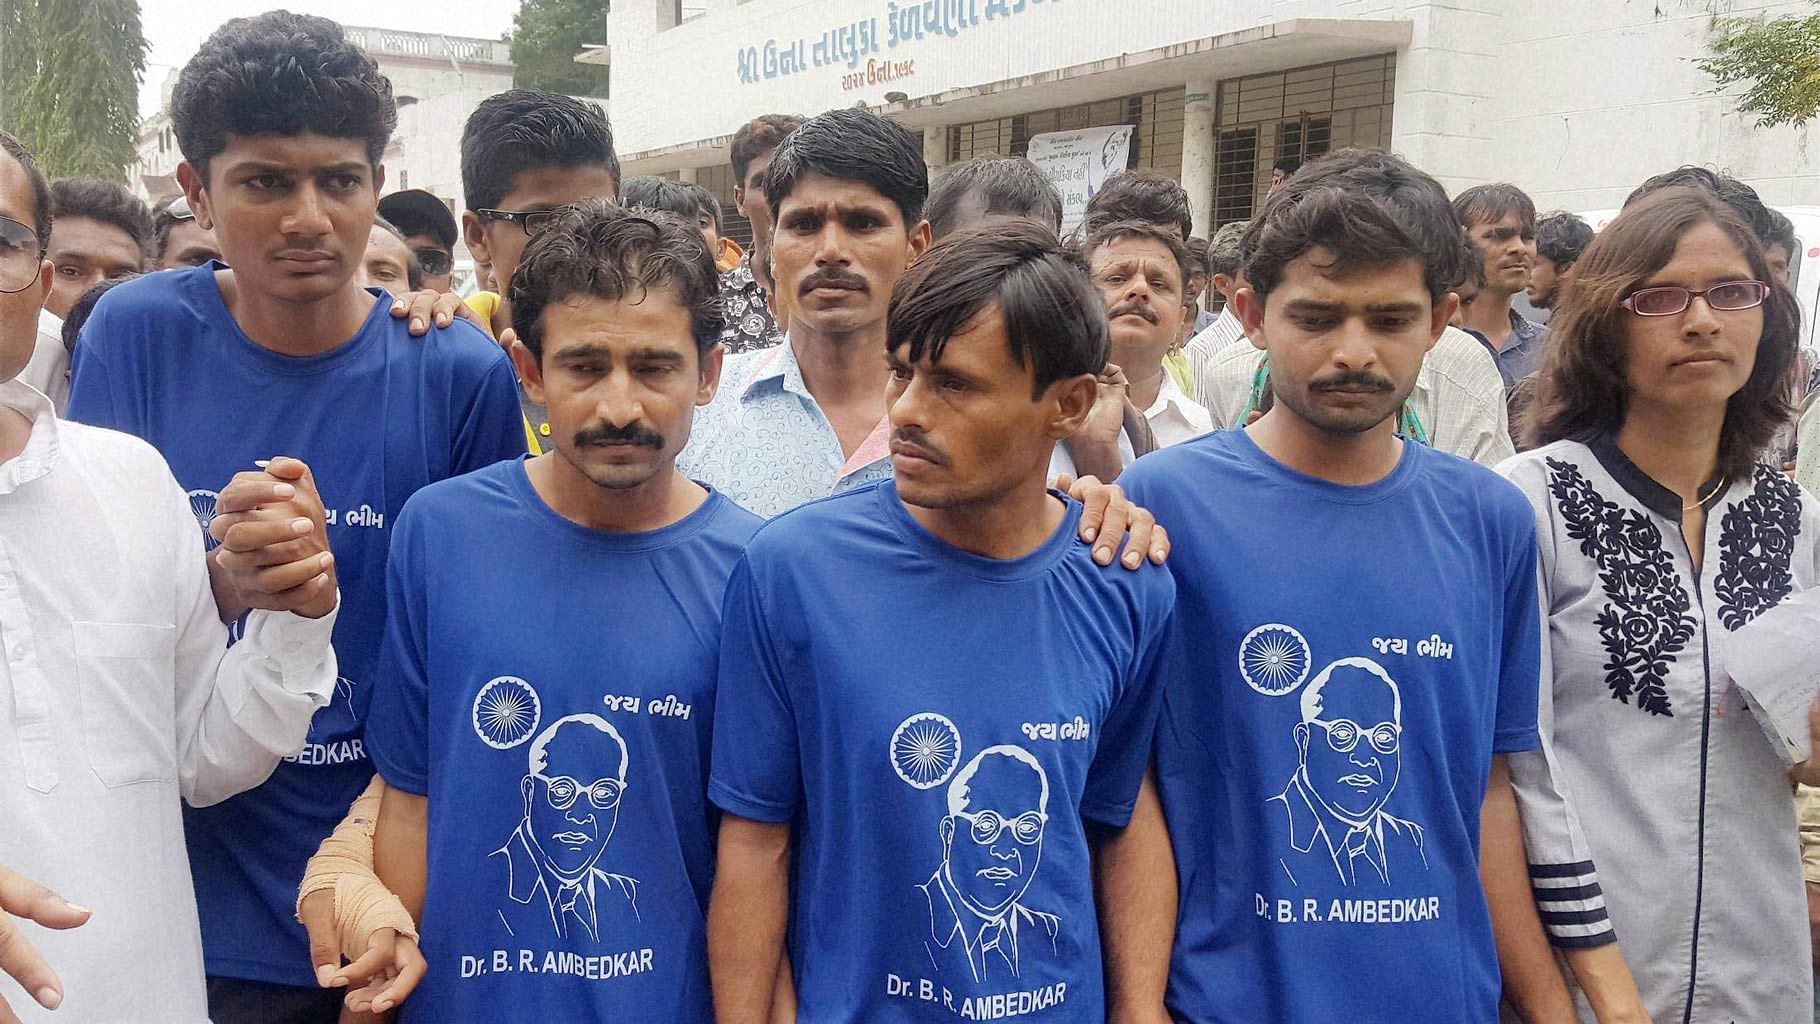 Four Dalit men who were attacked by cow-vigilantes arrive to take part in a solidarity rally in Una, Gujarat on Monday, 15 August 2016. (Photo: PTI)